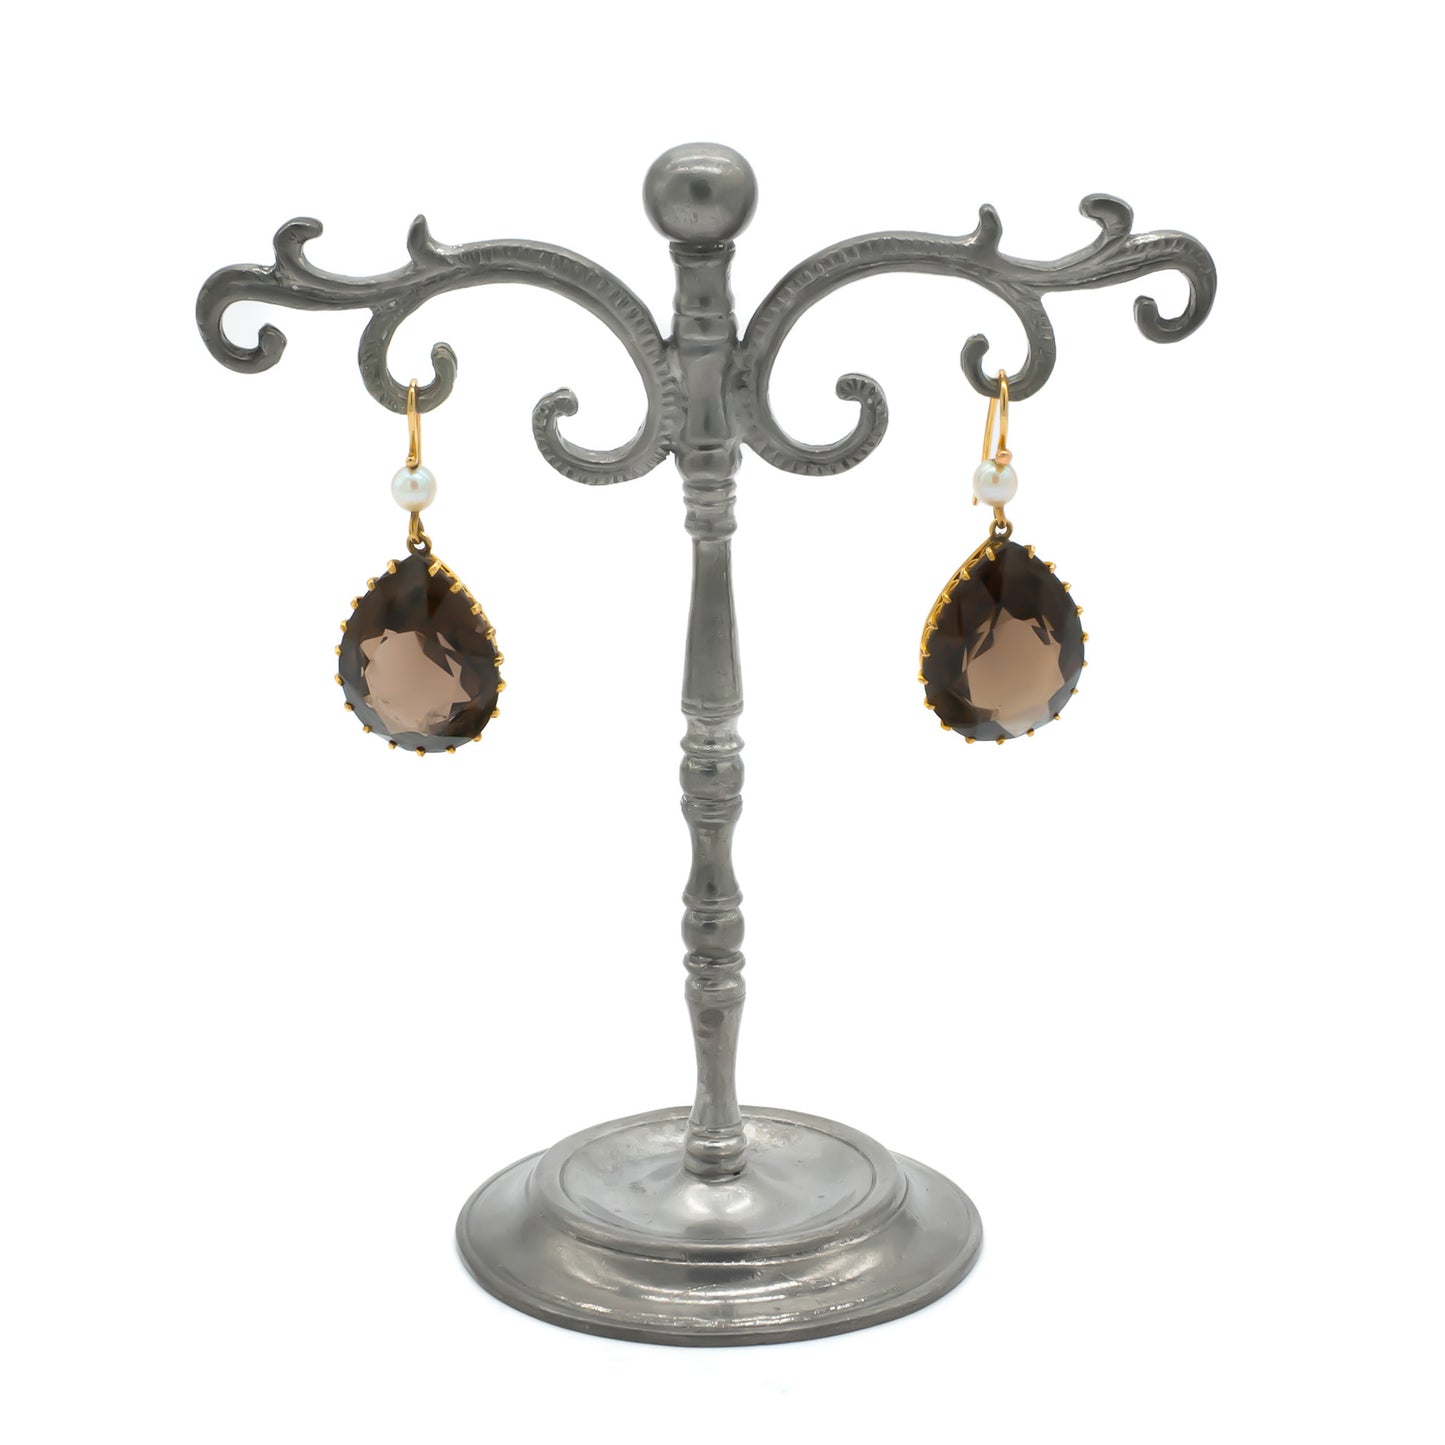 9ct Gold Smoky Quartz and Pearl Earrings